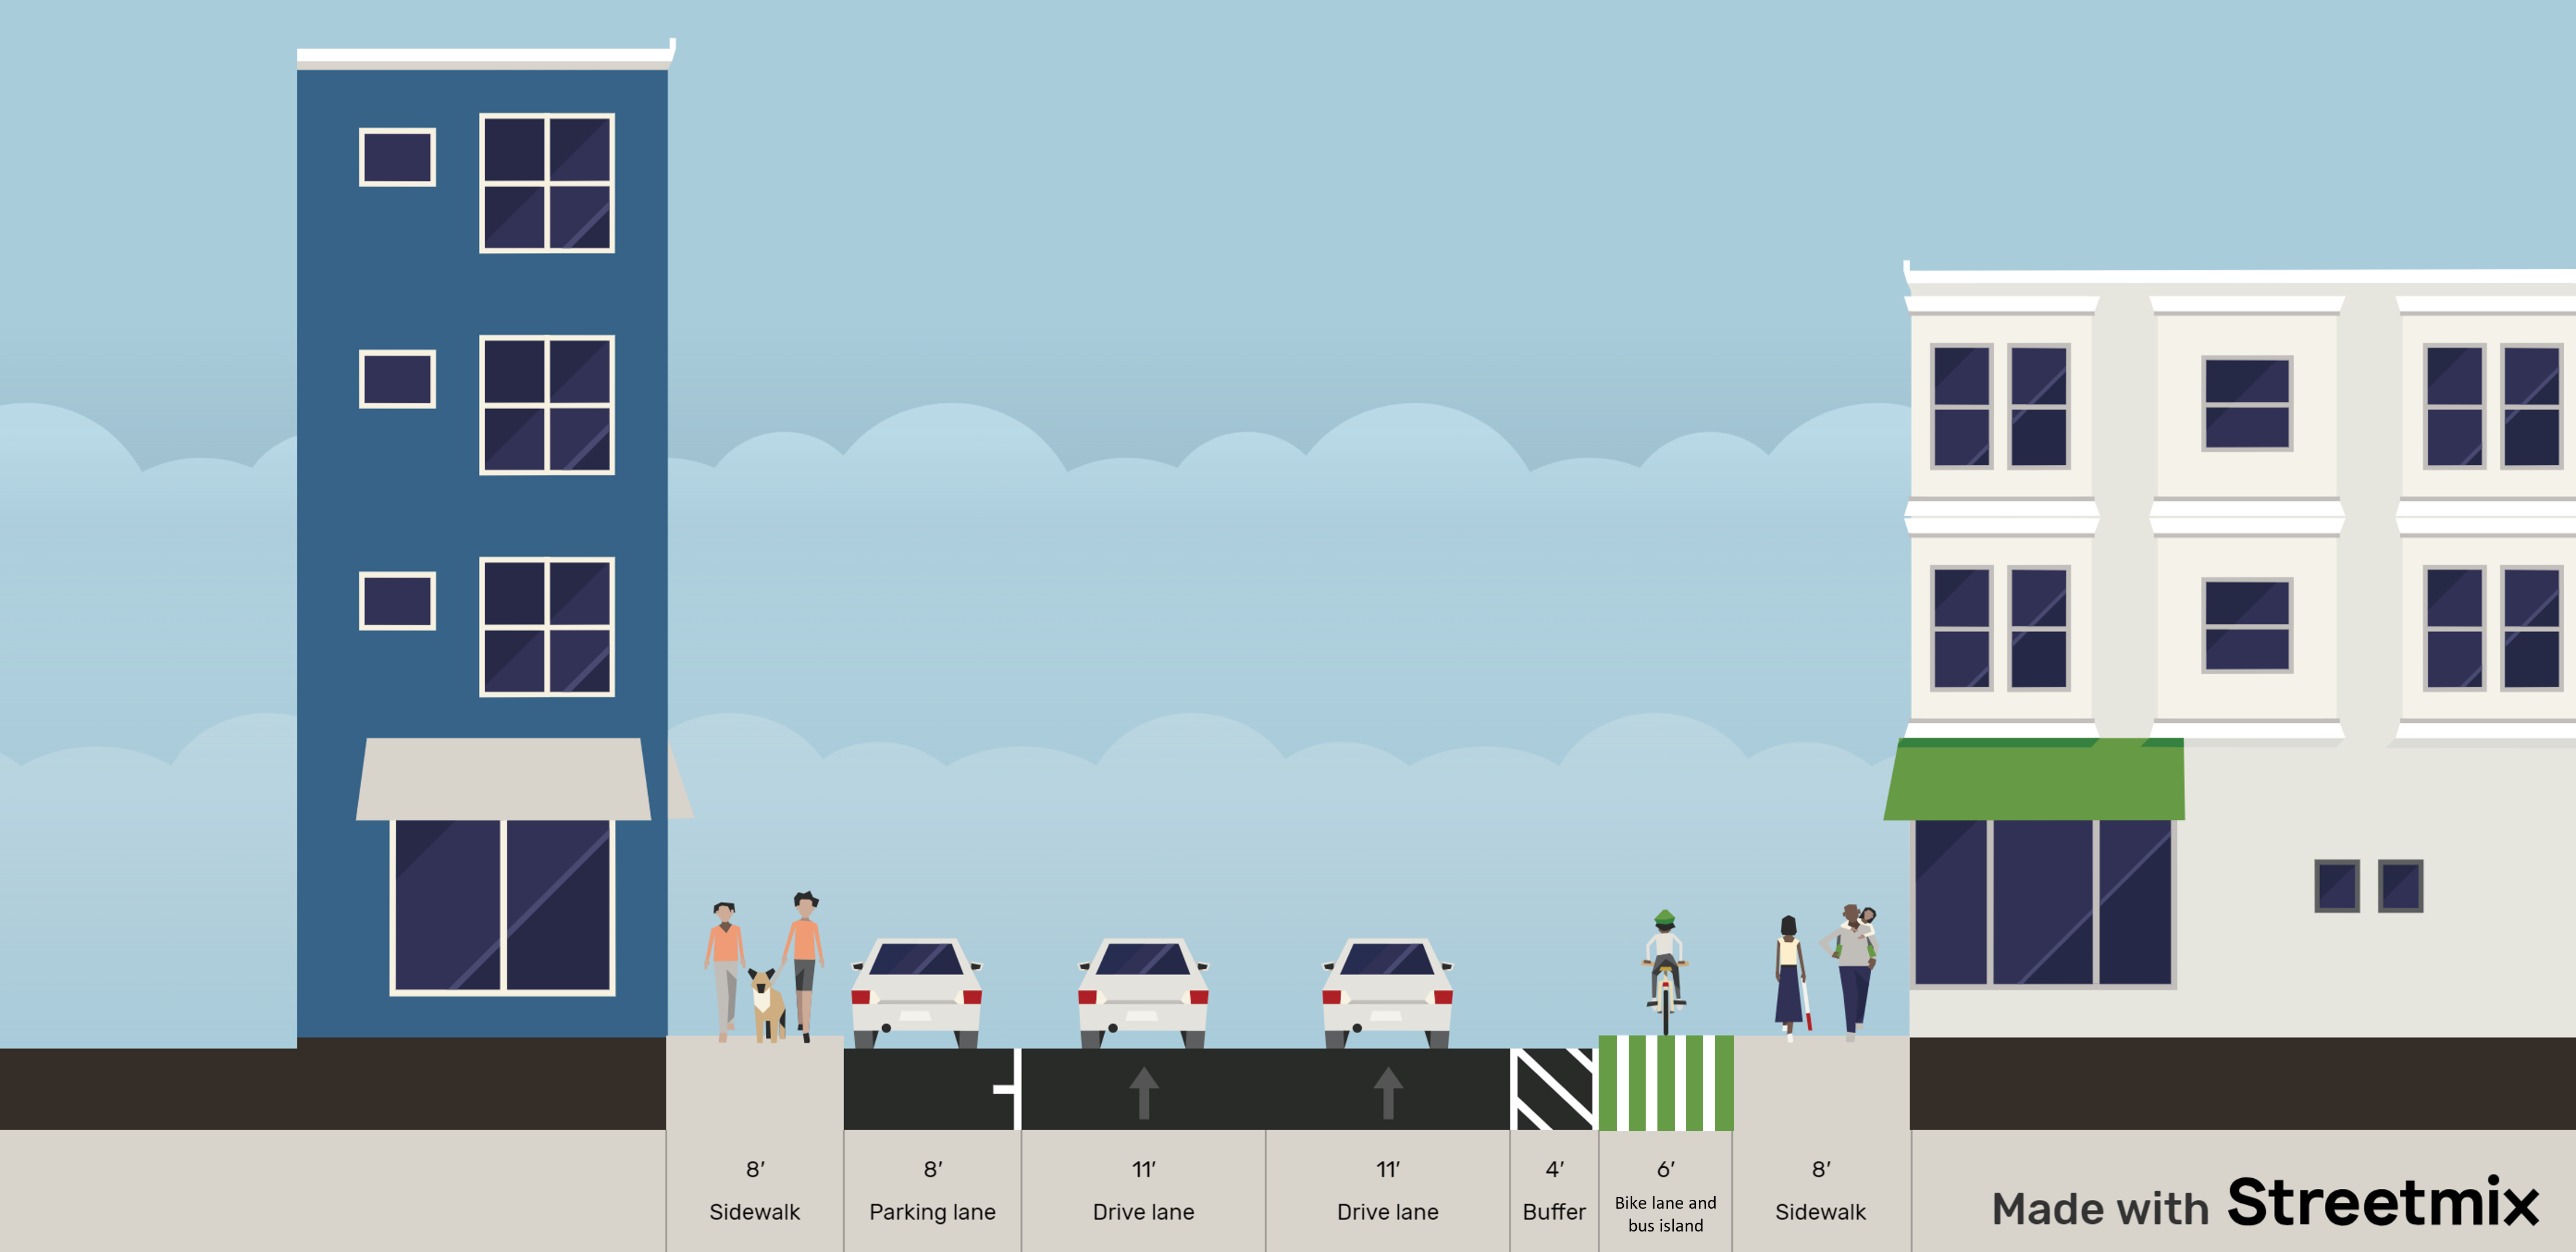 Project design for raised protected bike lanes